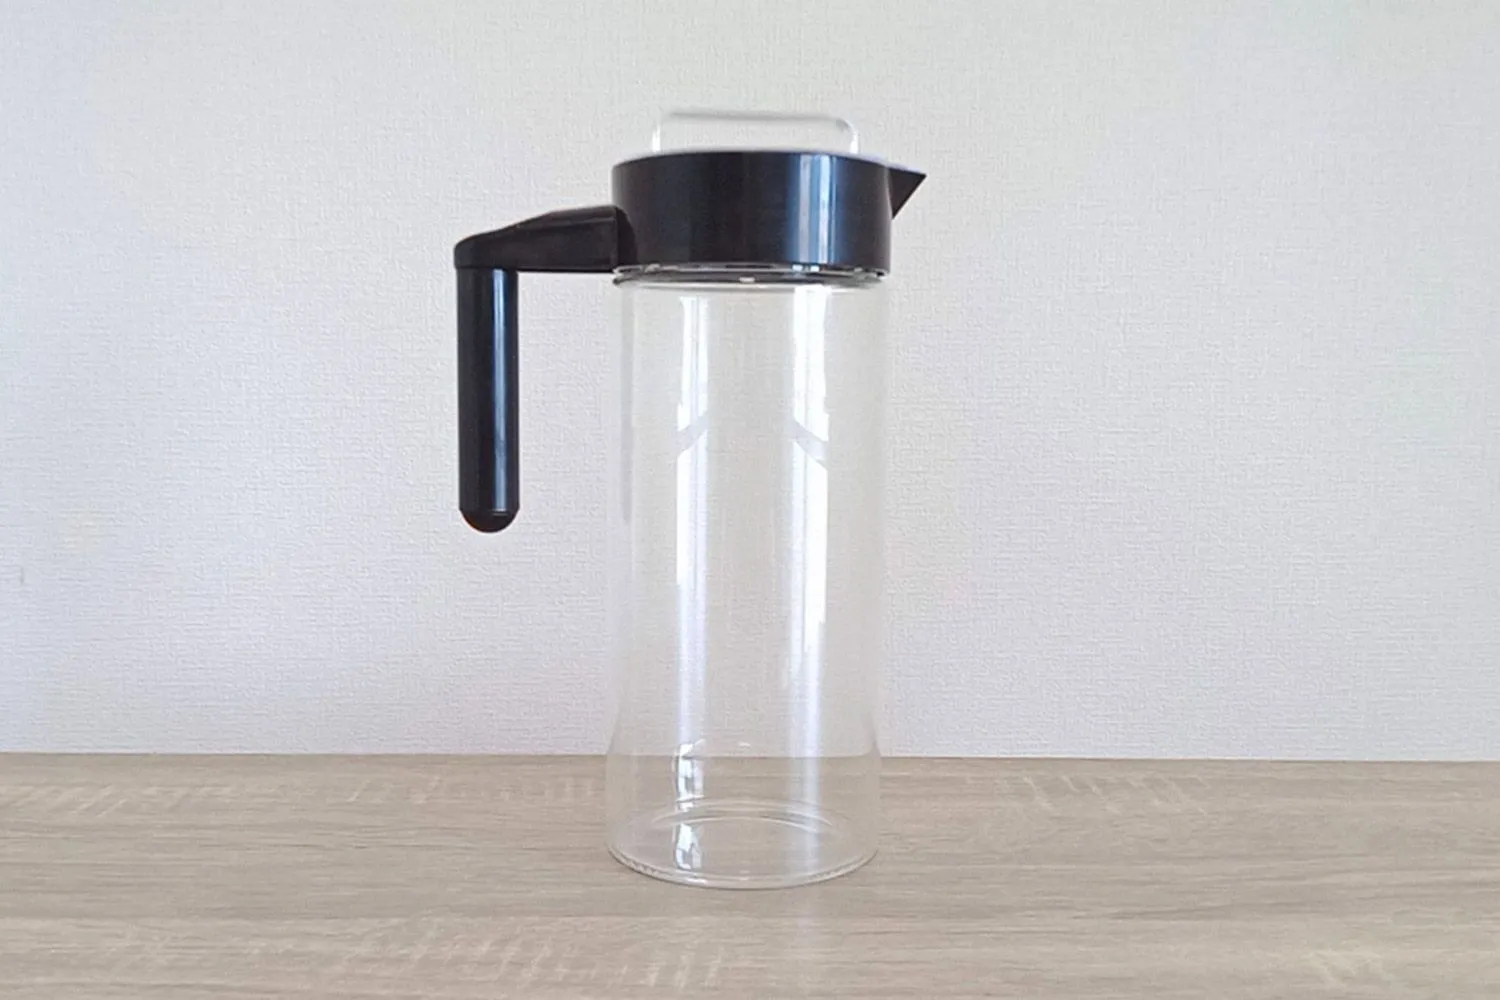 Review: Coffee Gator Cold-Brew Coffee Maker Kit